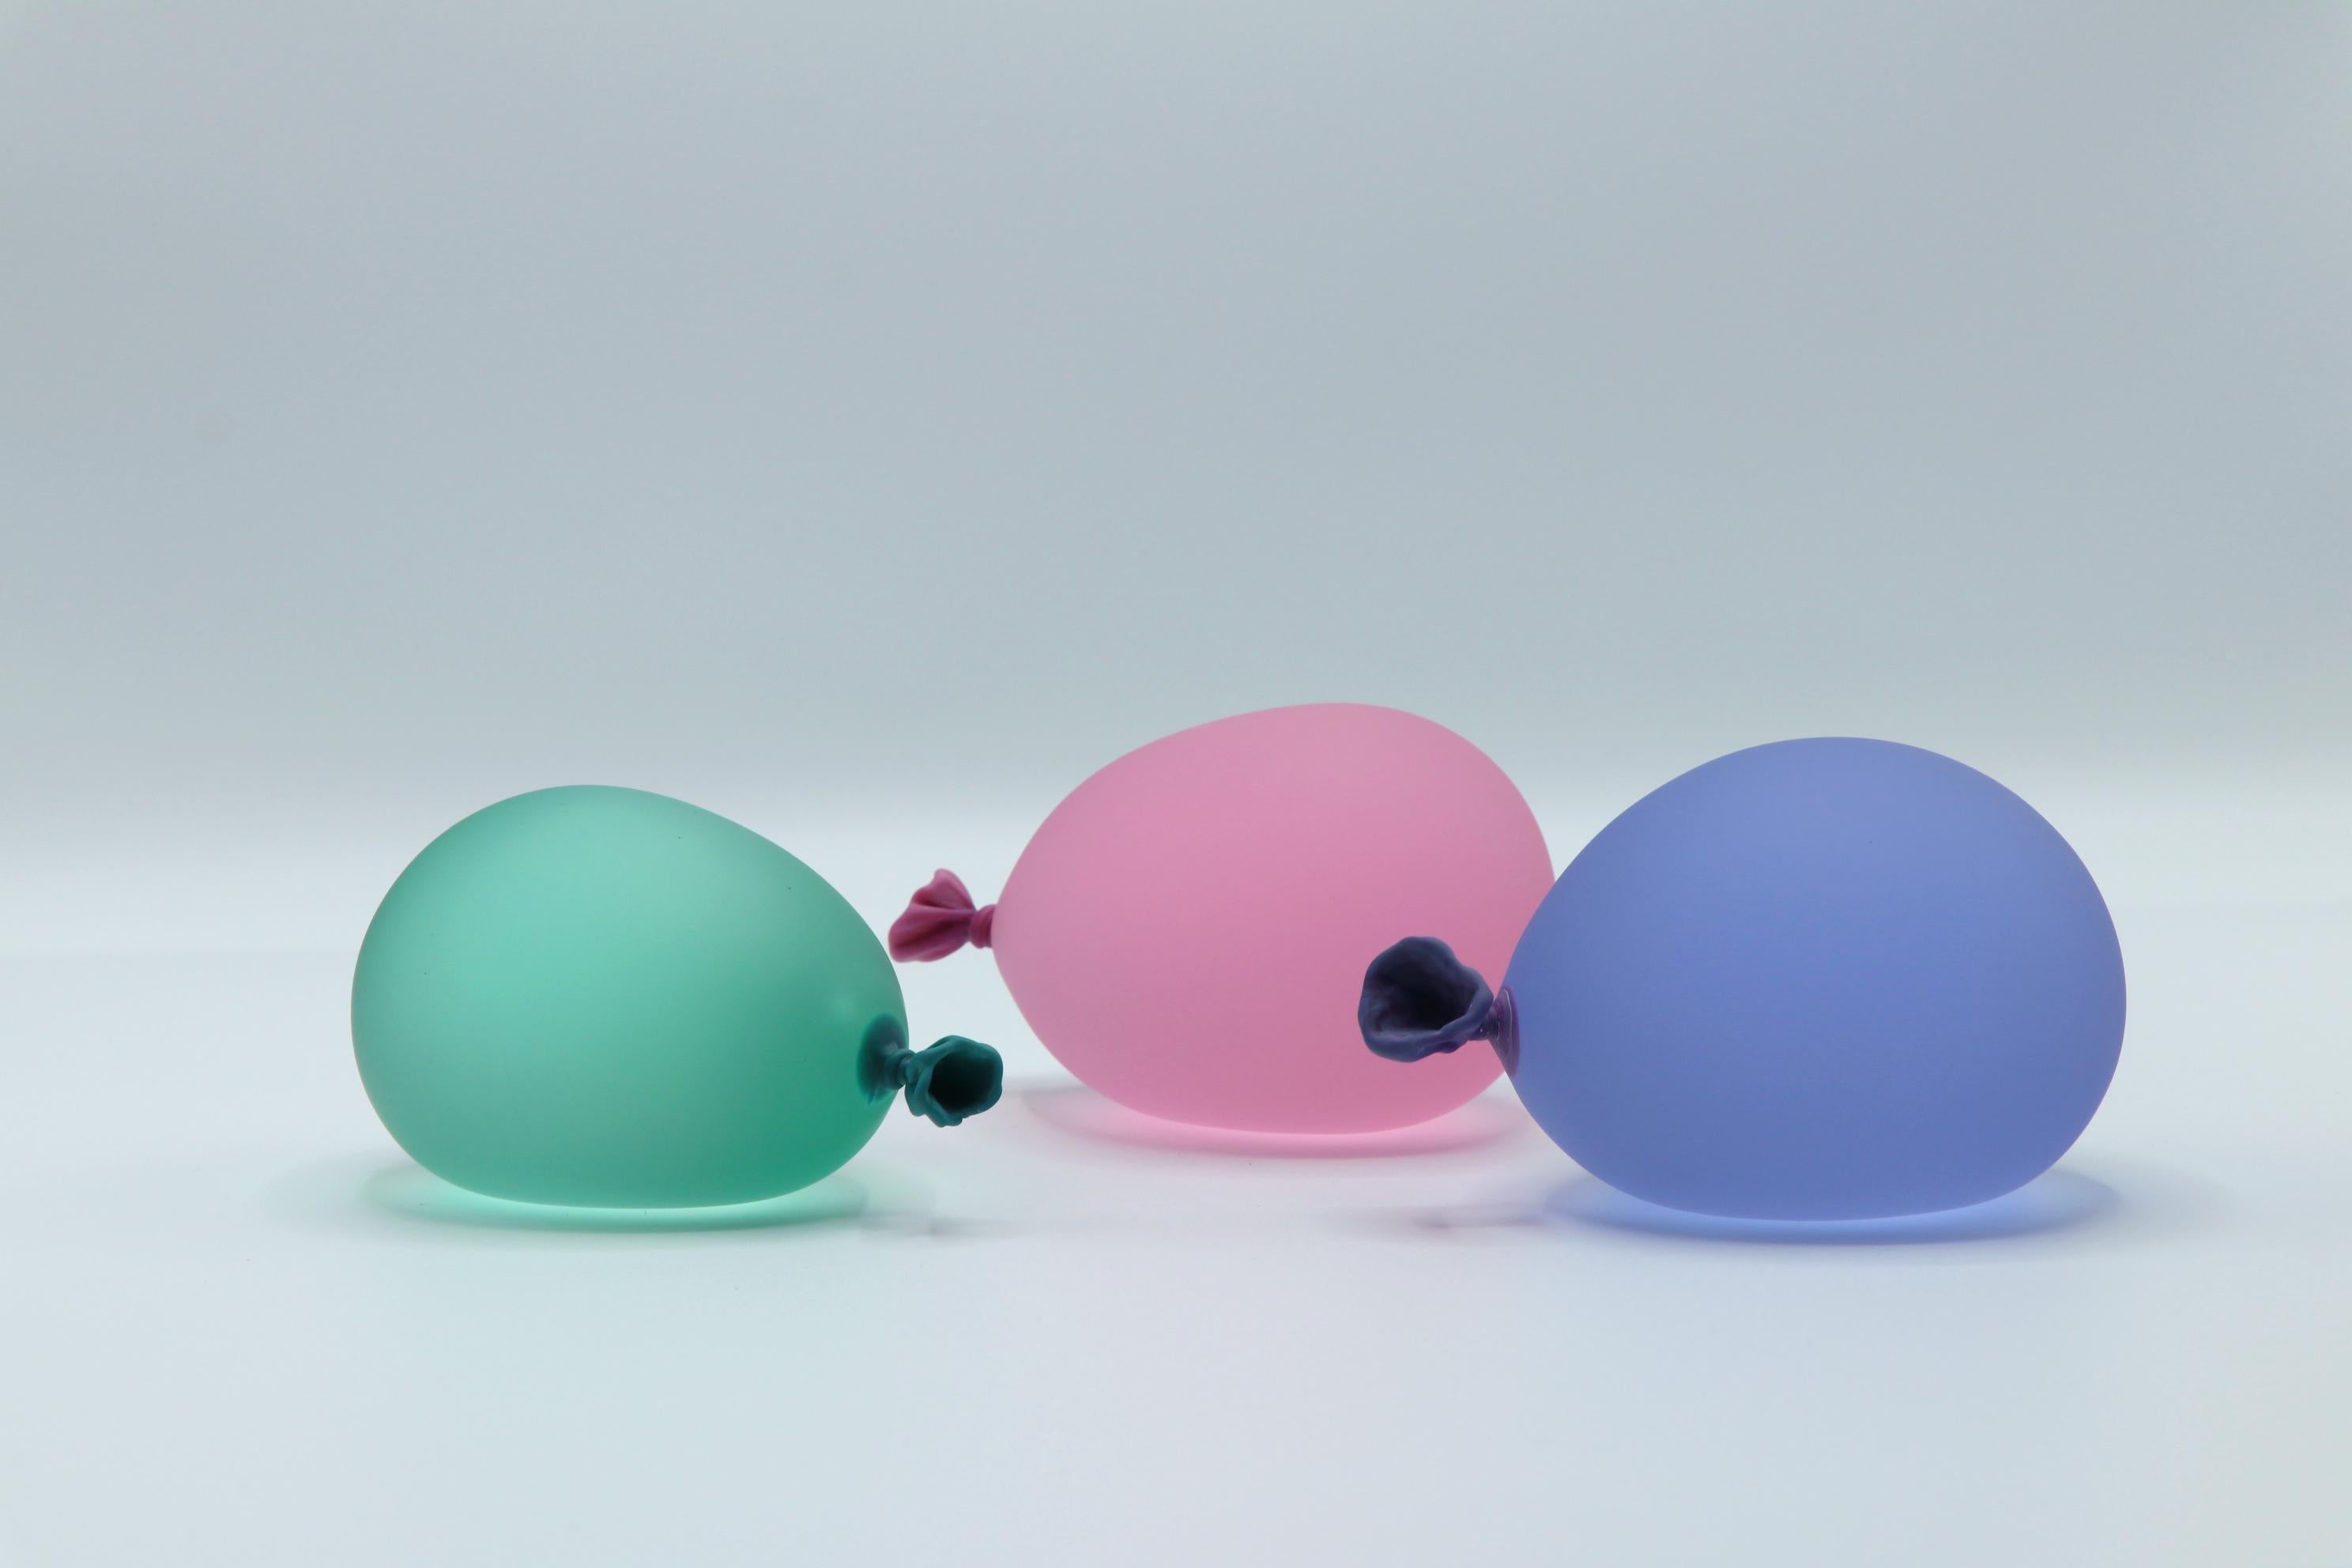 Set of 3 hyperreal glass water balloon sculptures by Dylan Martinez. Made of 100% hot-sculpted glass. 

Dylan Martinez’s hyperrealistic water balloons are made of solid sculpted glass sandblasted and acid-etched to resemble real water balloons. The